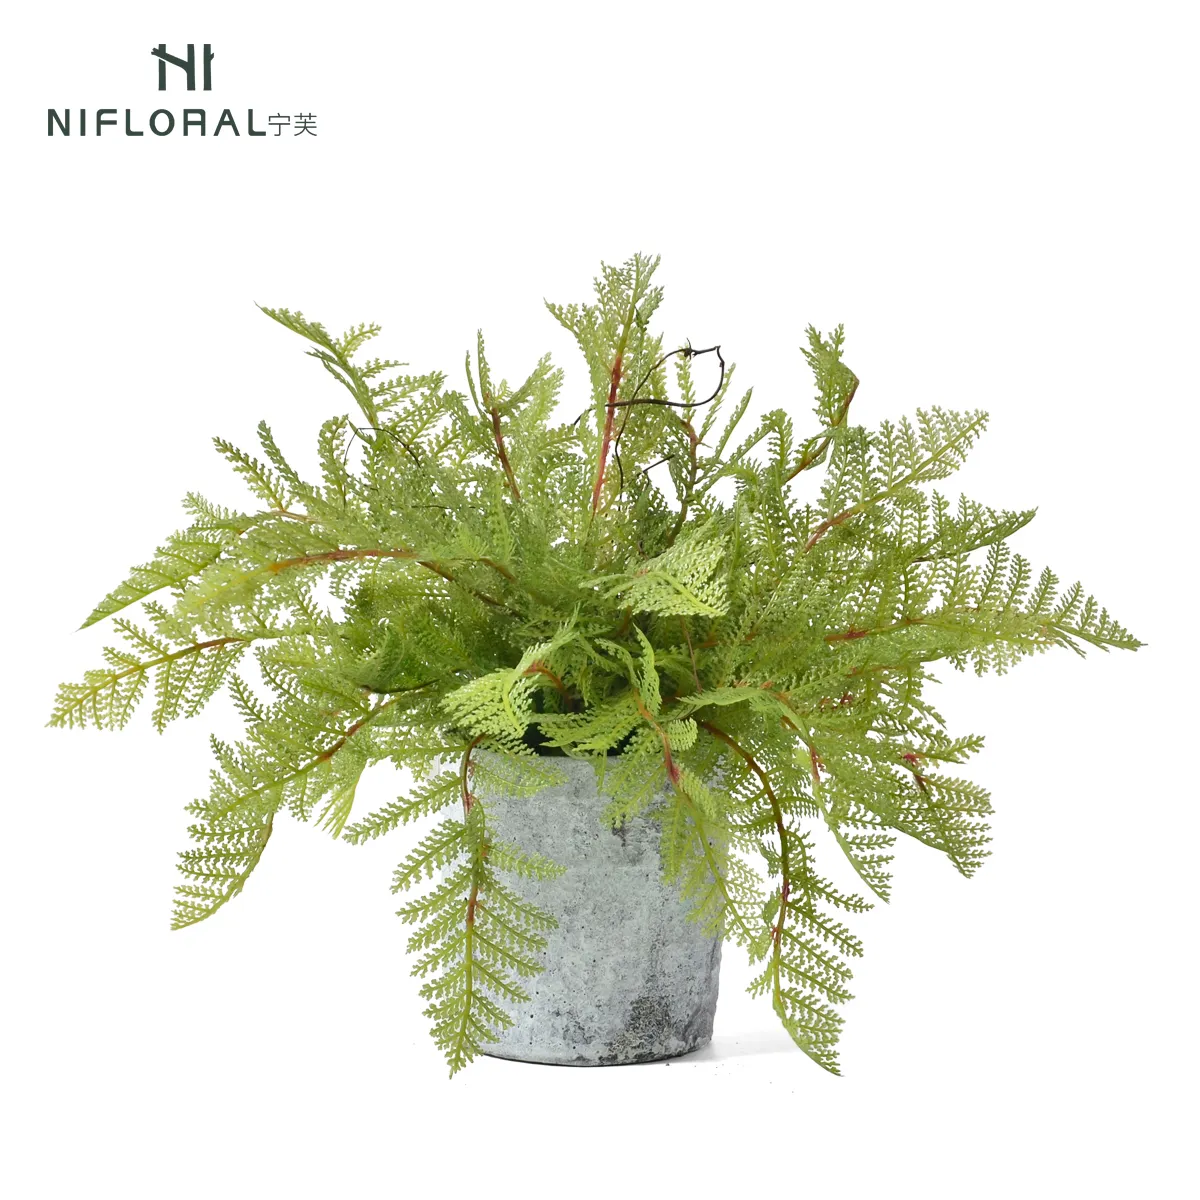 High Simulation Nearly Natural Faux Small Potted Plants Greenery Indoor Decorative Artificial Fern Bonsai Plant